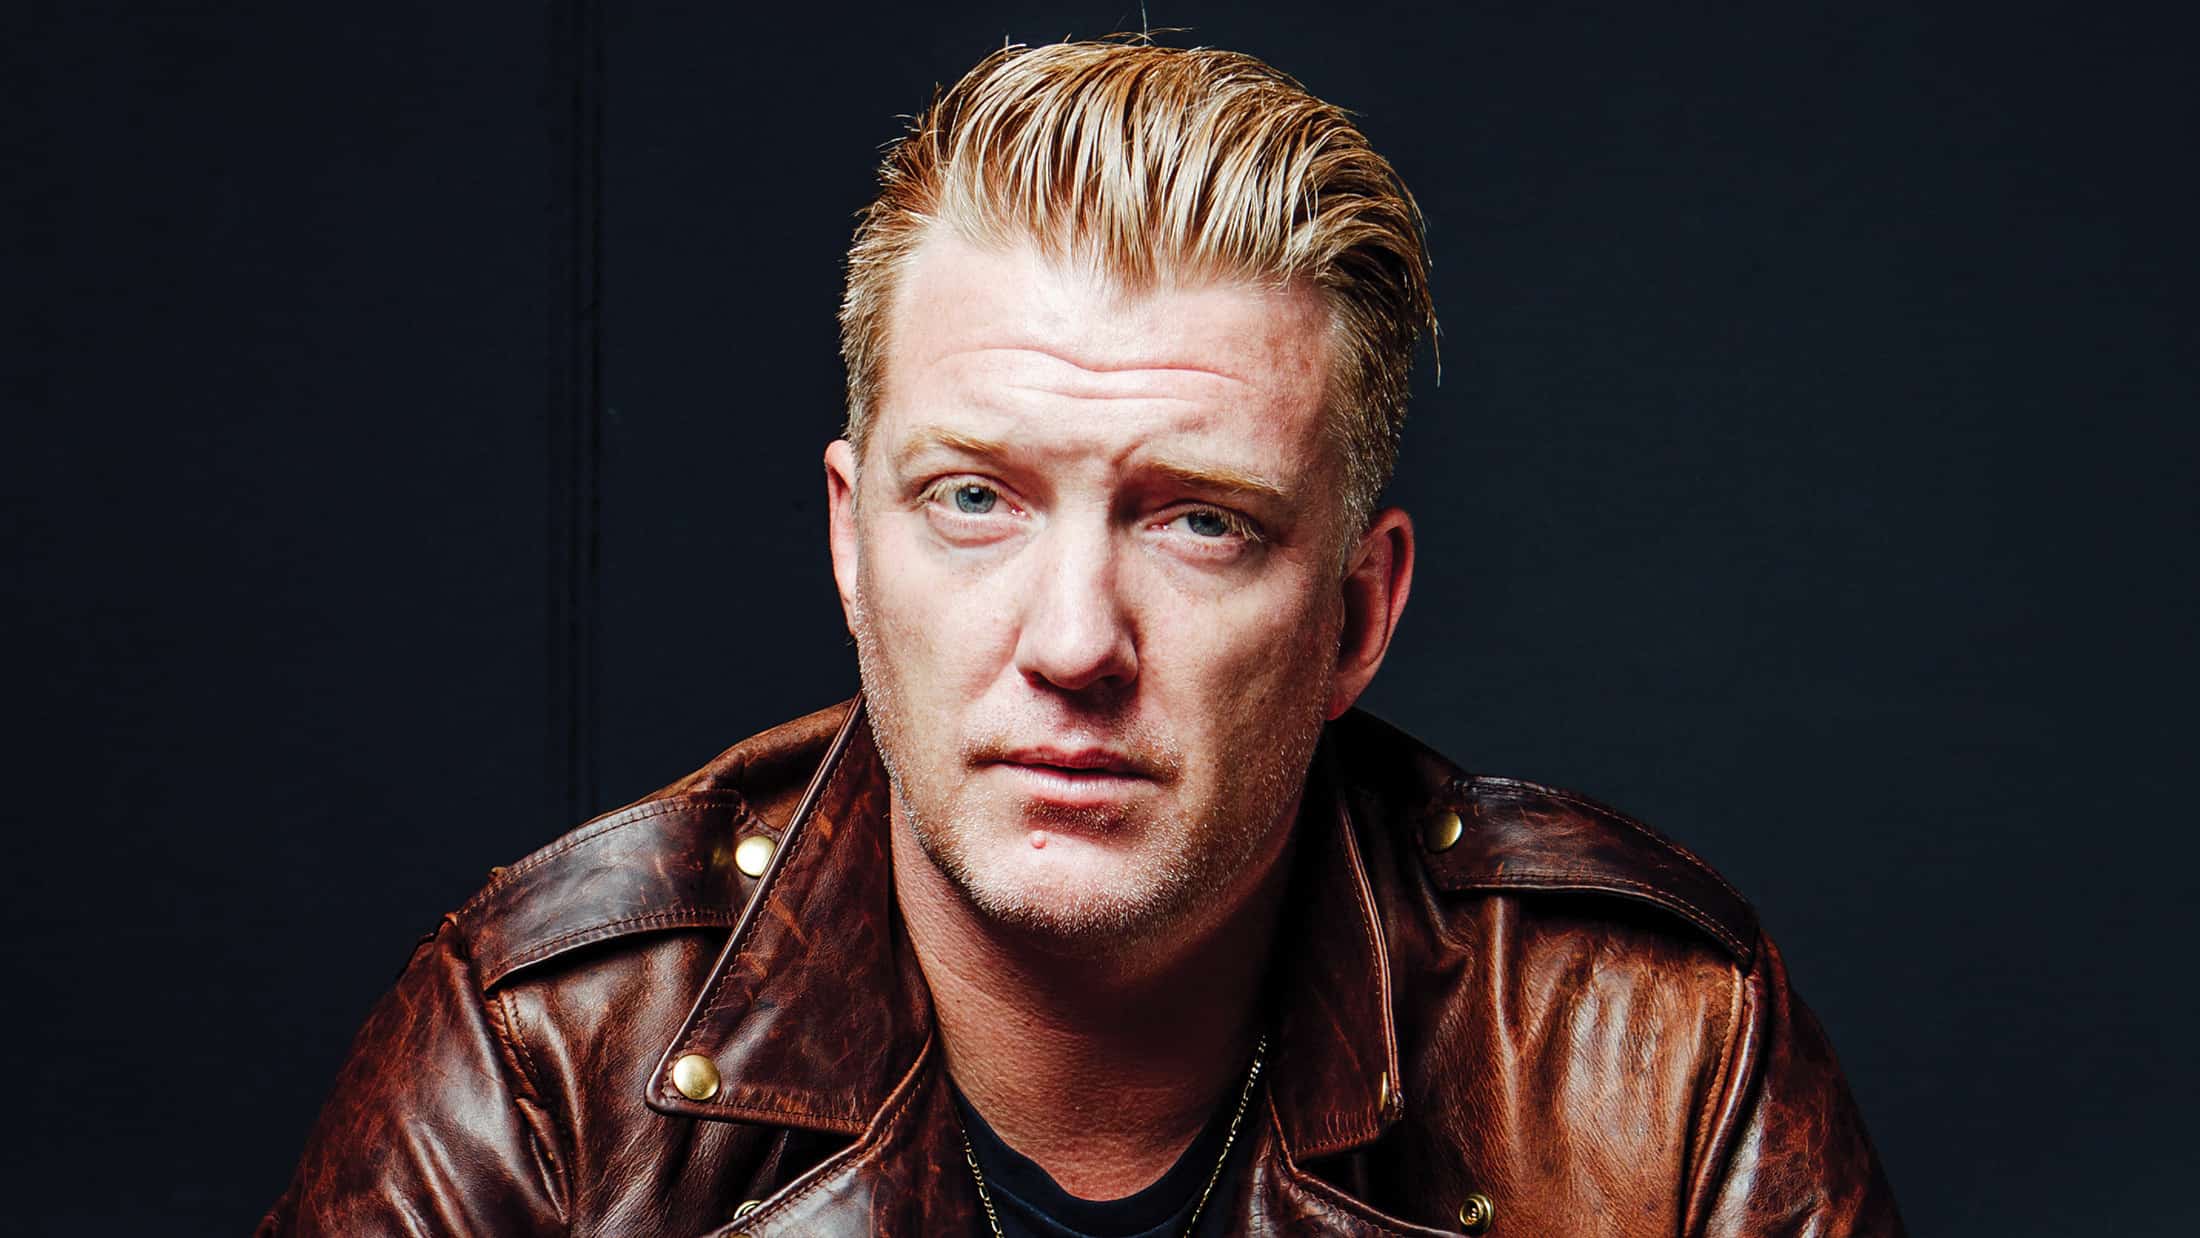 American artist Josh Homme, best known as Joshua Michael Homme, is a singer, songwriter, and record producer. 